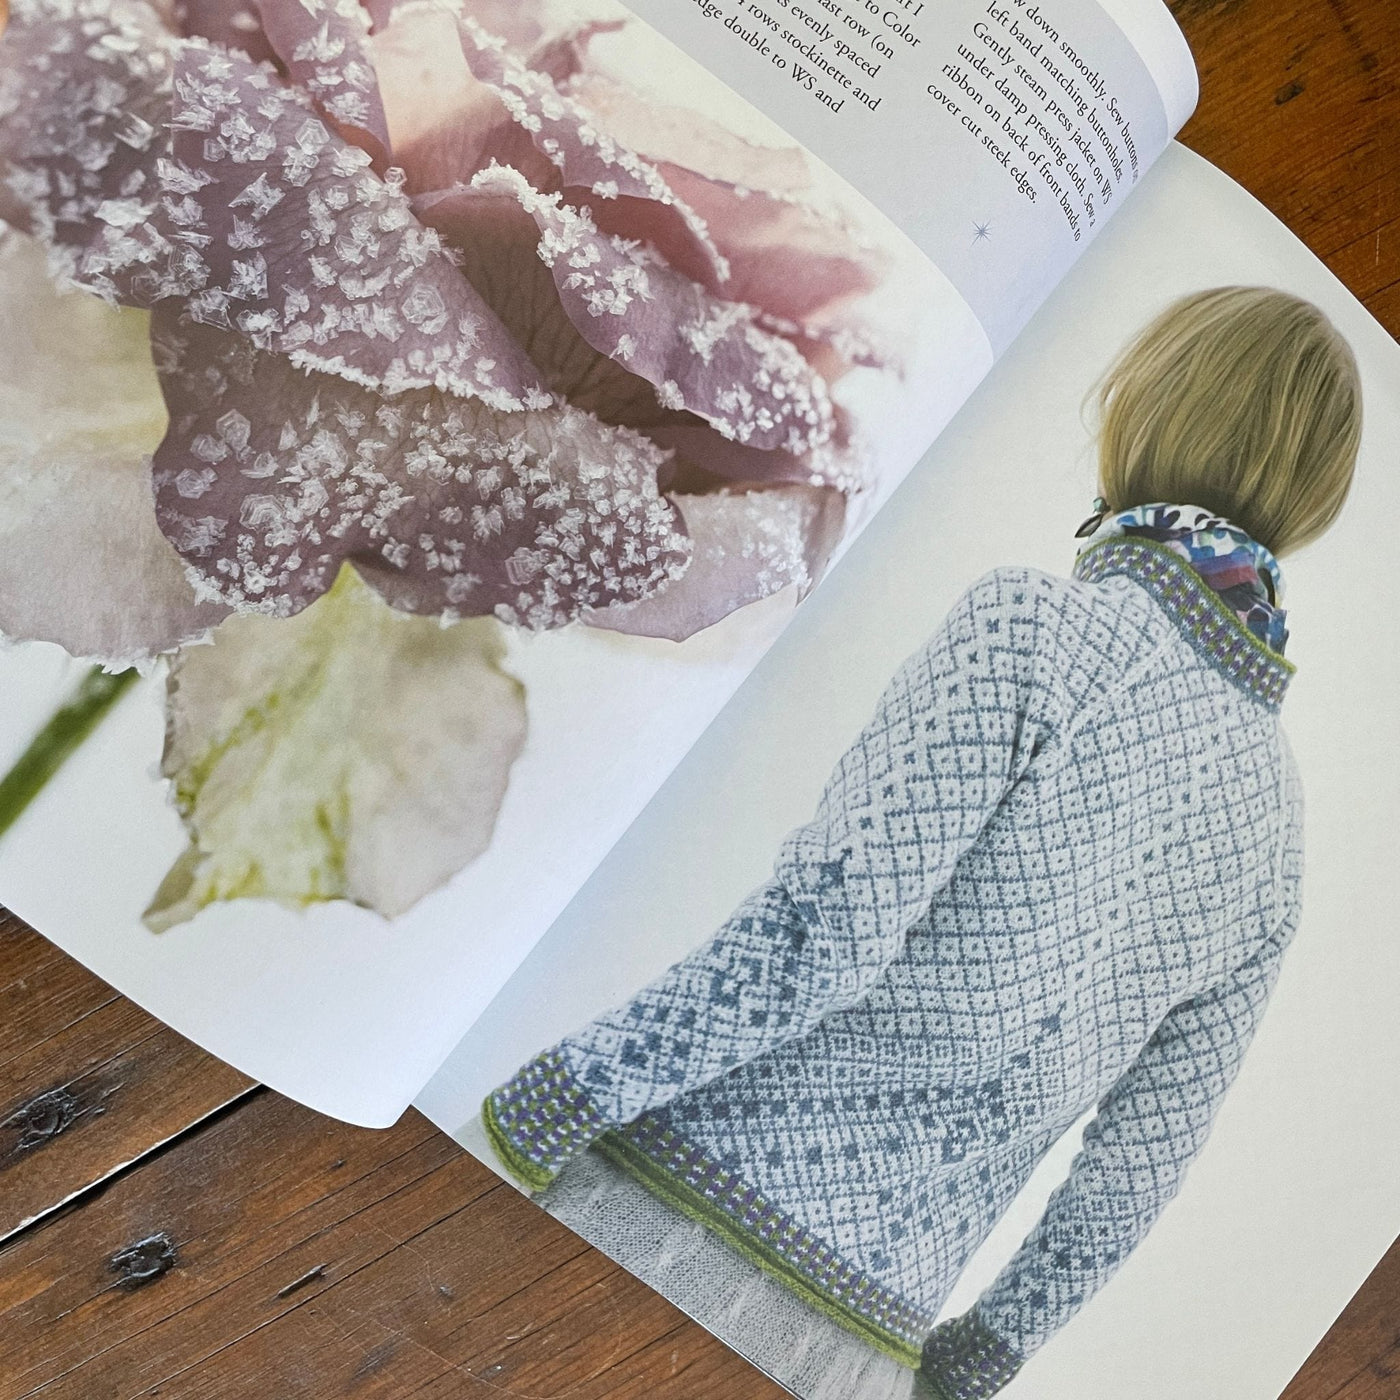 Inside pages of book Norwegian Sweaters & Jackets by Kari Hestnes shows woman wearing yellow colorwork sweater with flower on opposite page.